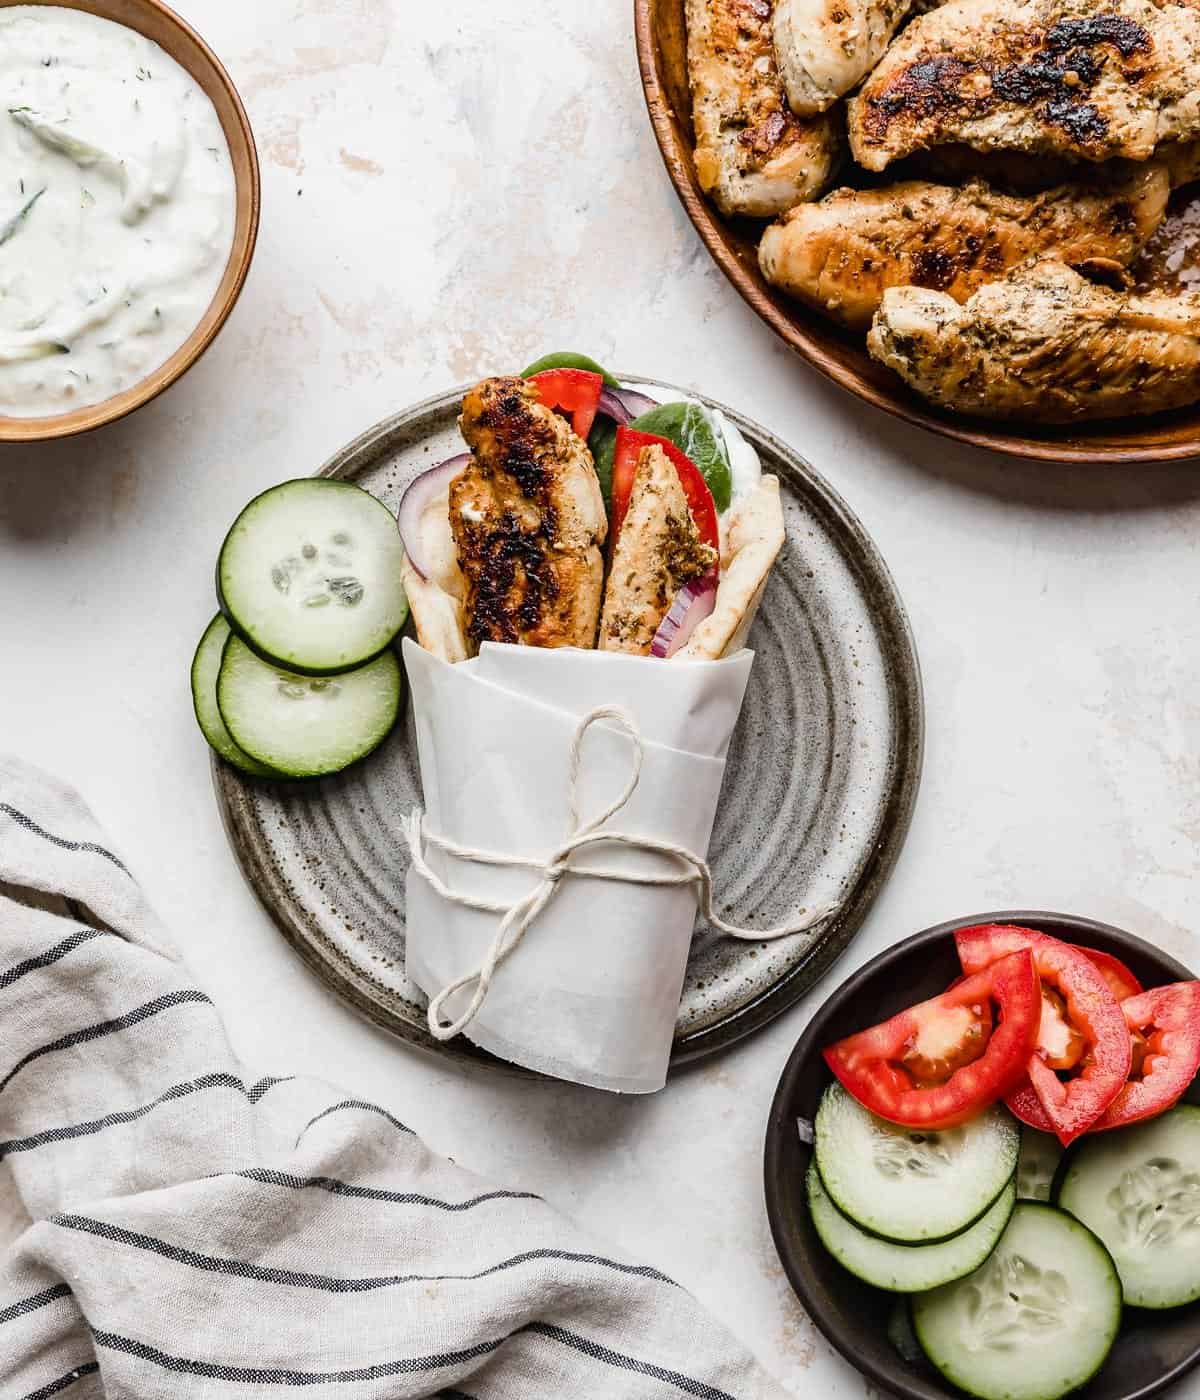 A Greek Chicken Gyro topped with tomatoes, chicken tenders, and wrapped in white parchment on a white background.